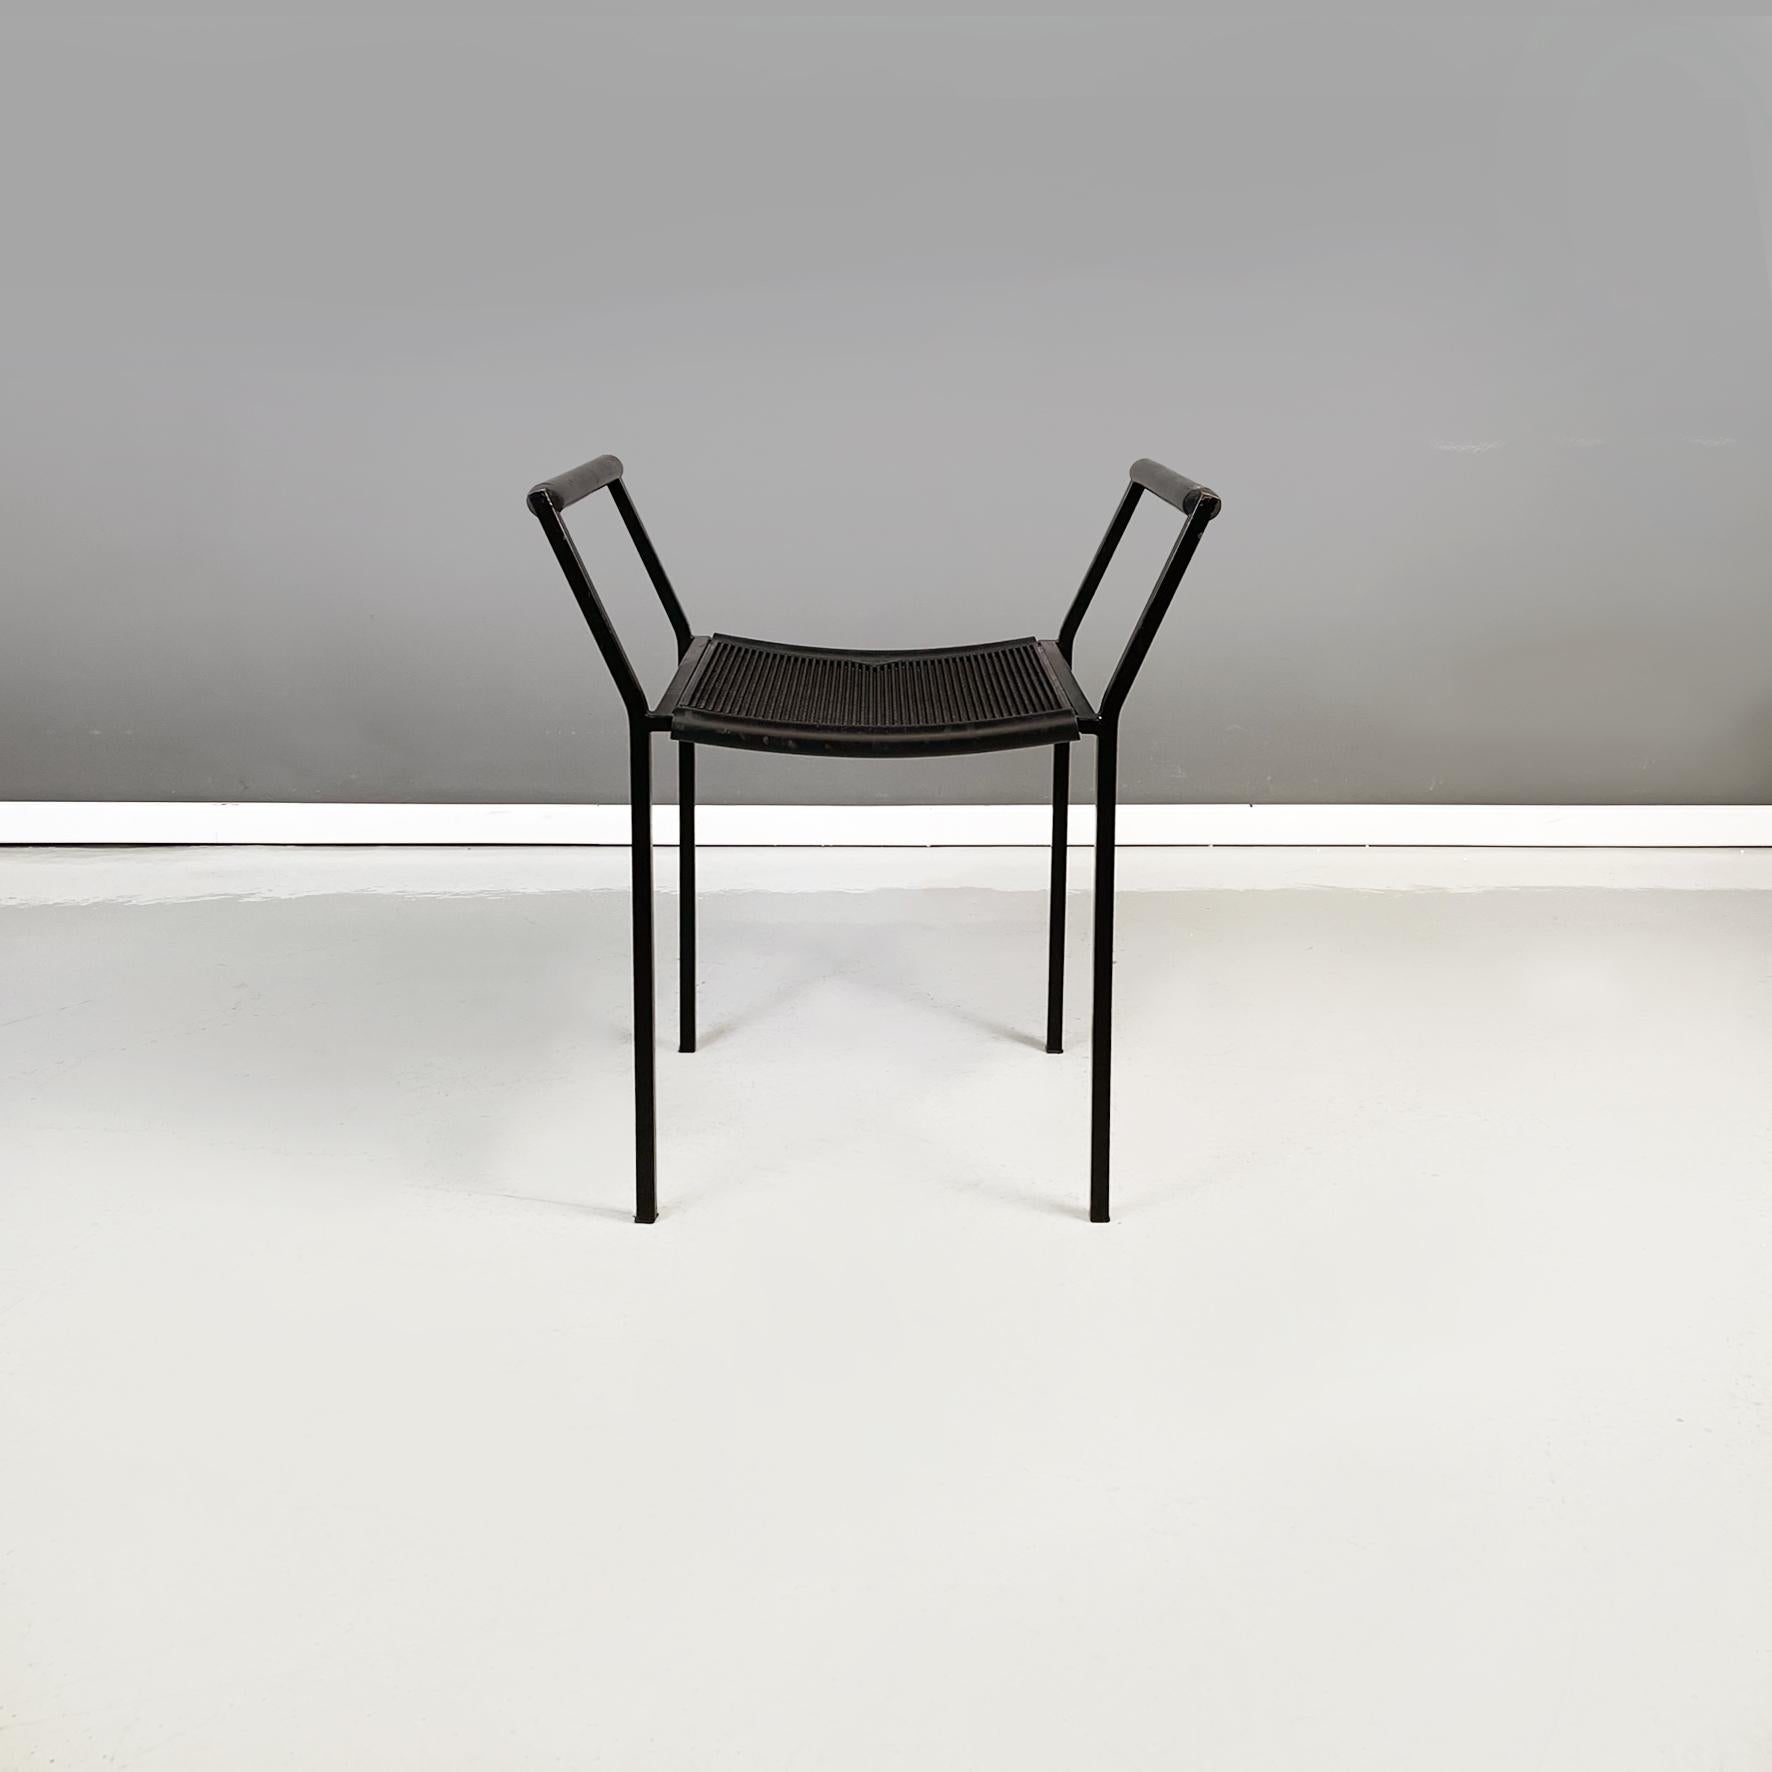 Italian modern Black metal and rubber Chair Savonarola by Maurizio Peregalli for Zeus, 1990s
Chair mod. Savonarola with square seat in textured black rubber. The structure is entirely in square section in matt black painted steel. The stool has no